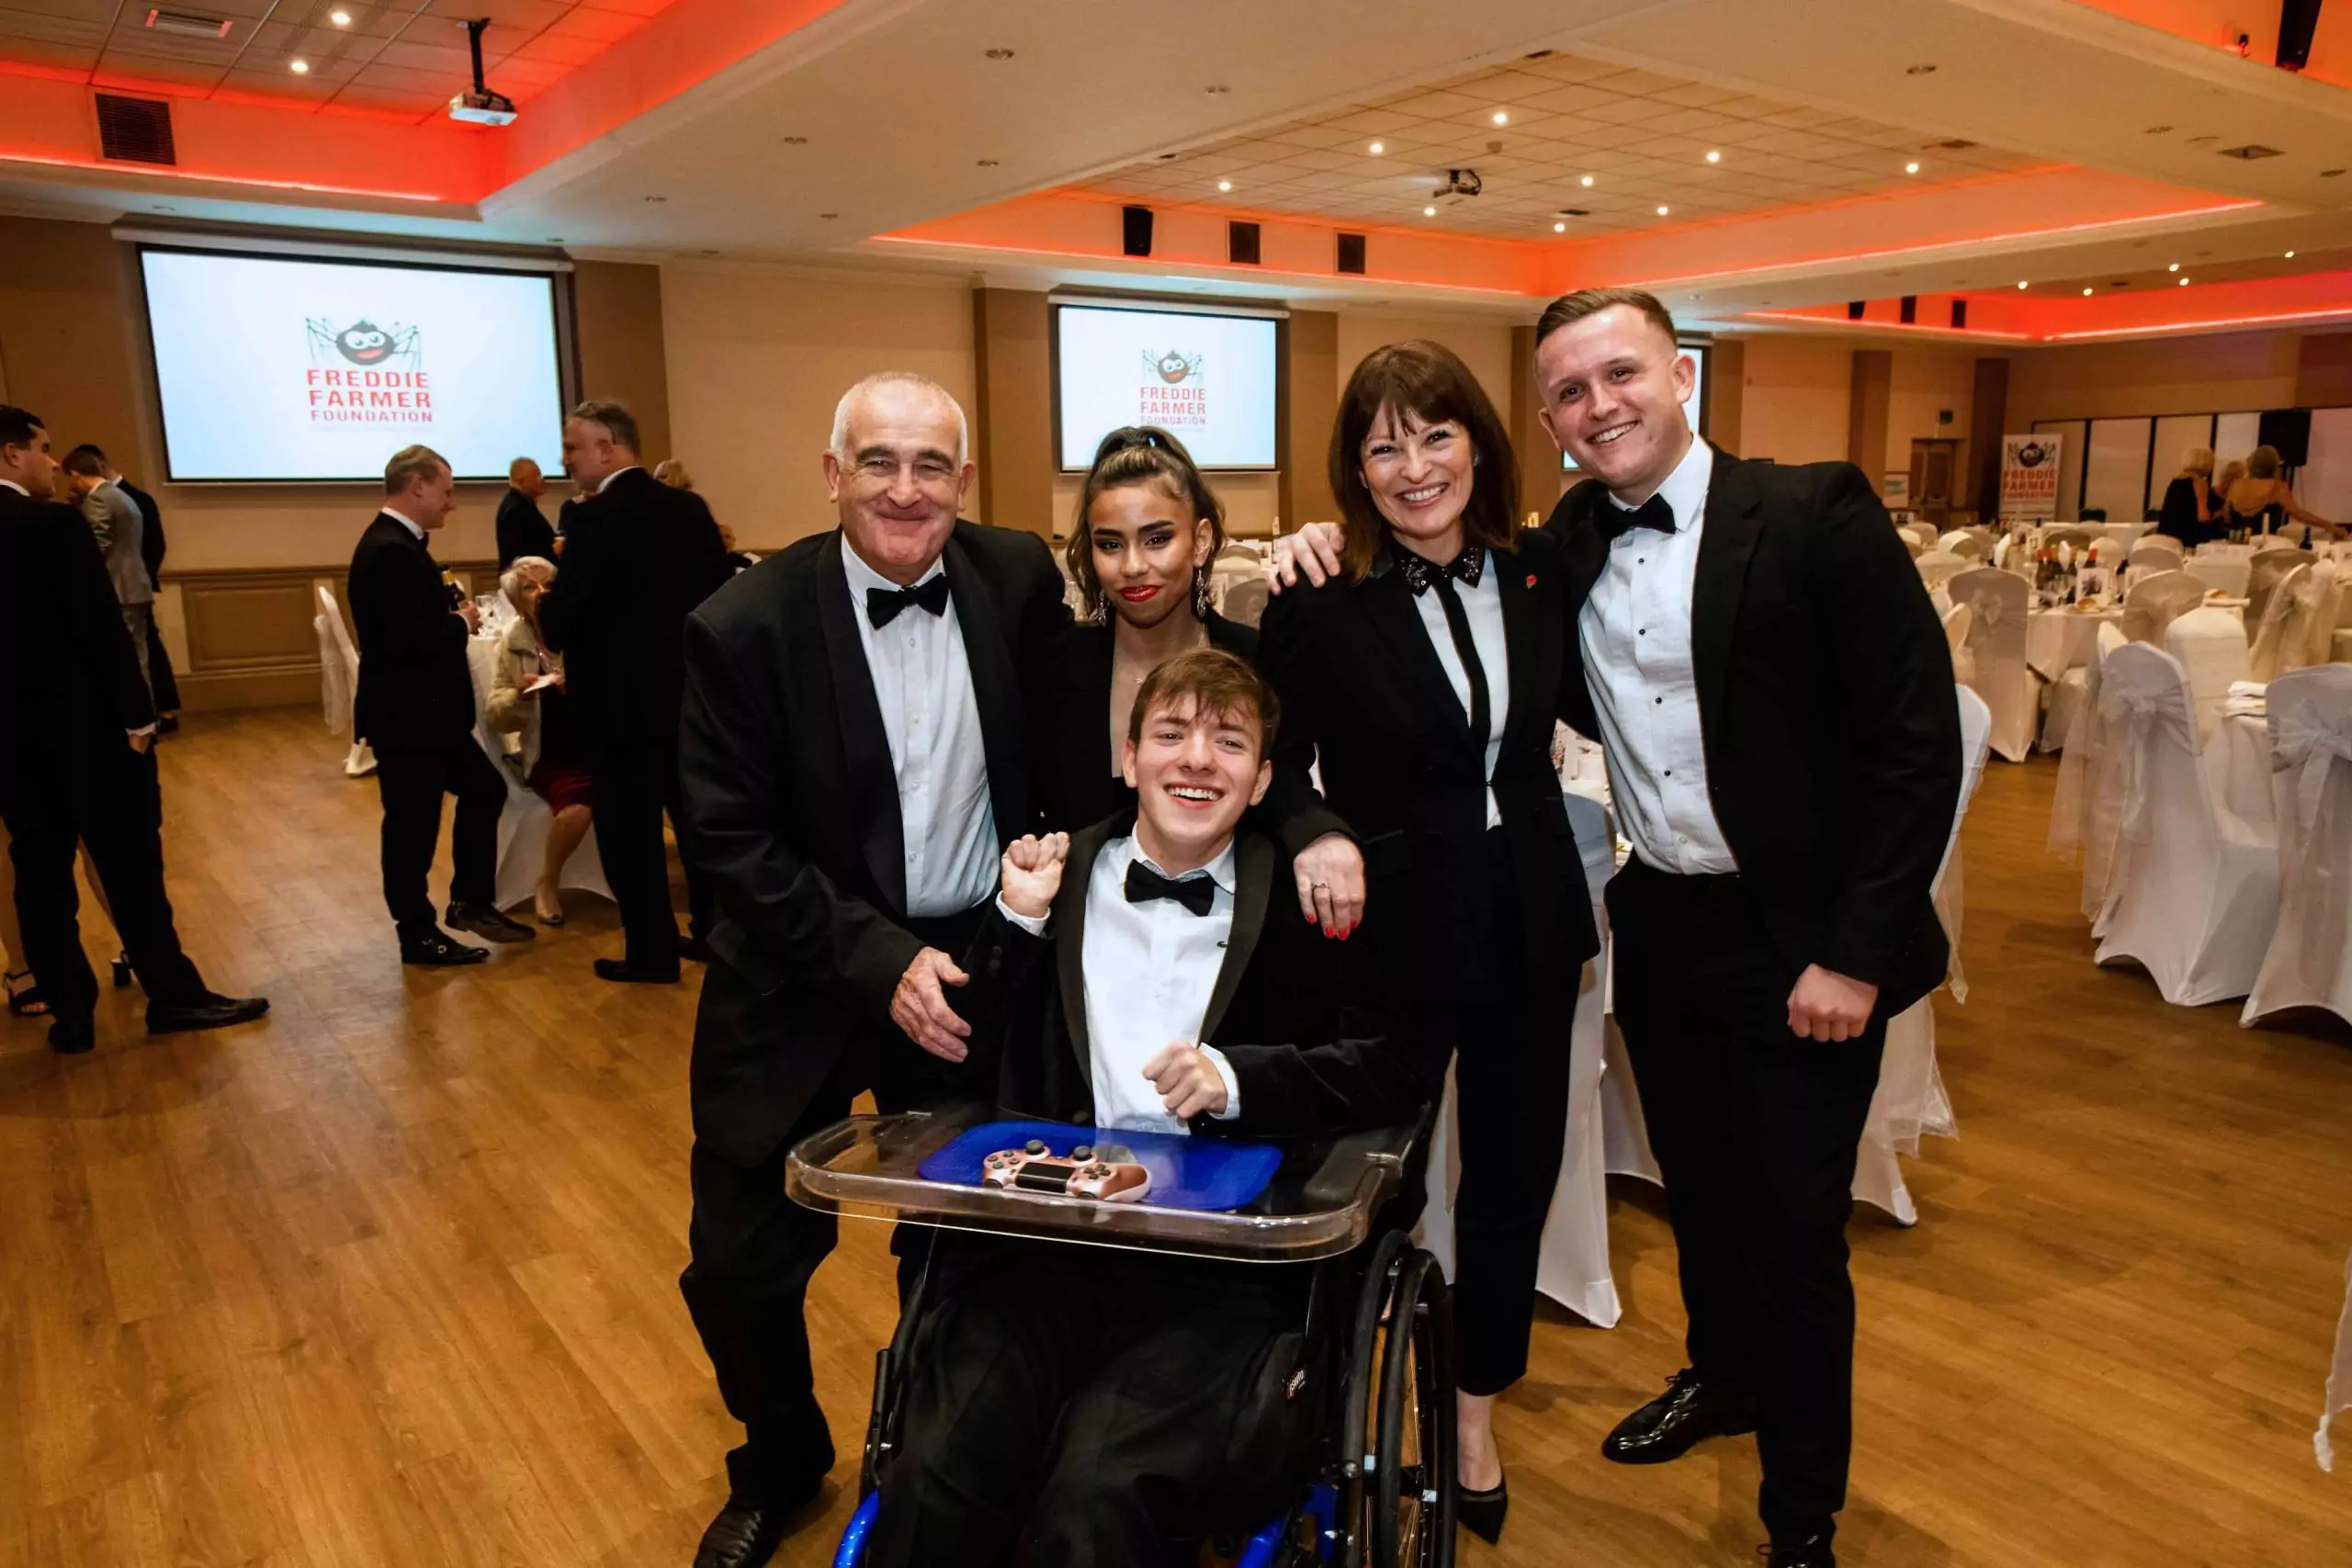 A charity ball has raised tens of thousands of pounds for the Freddie Farmer Physiotherapy Centre